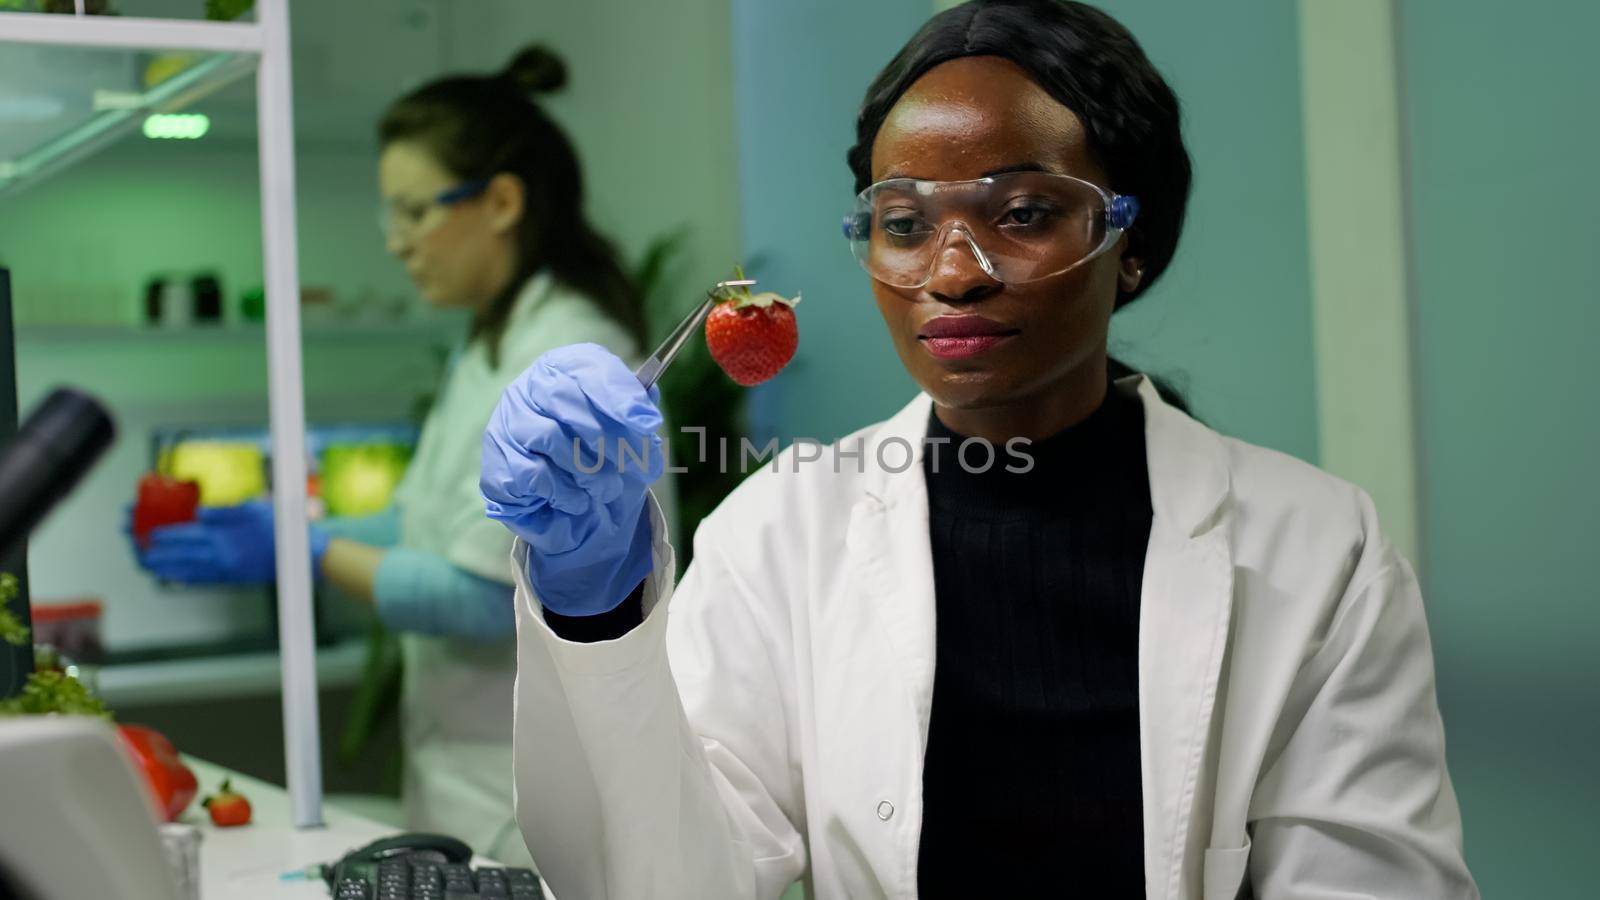 African biologist holding strawberry injected with dna liquid with medical tweezers by DCStudio